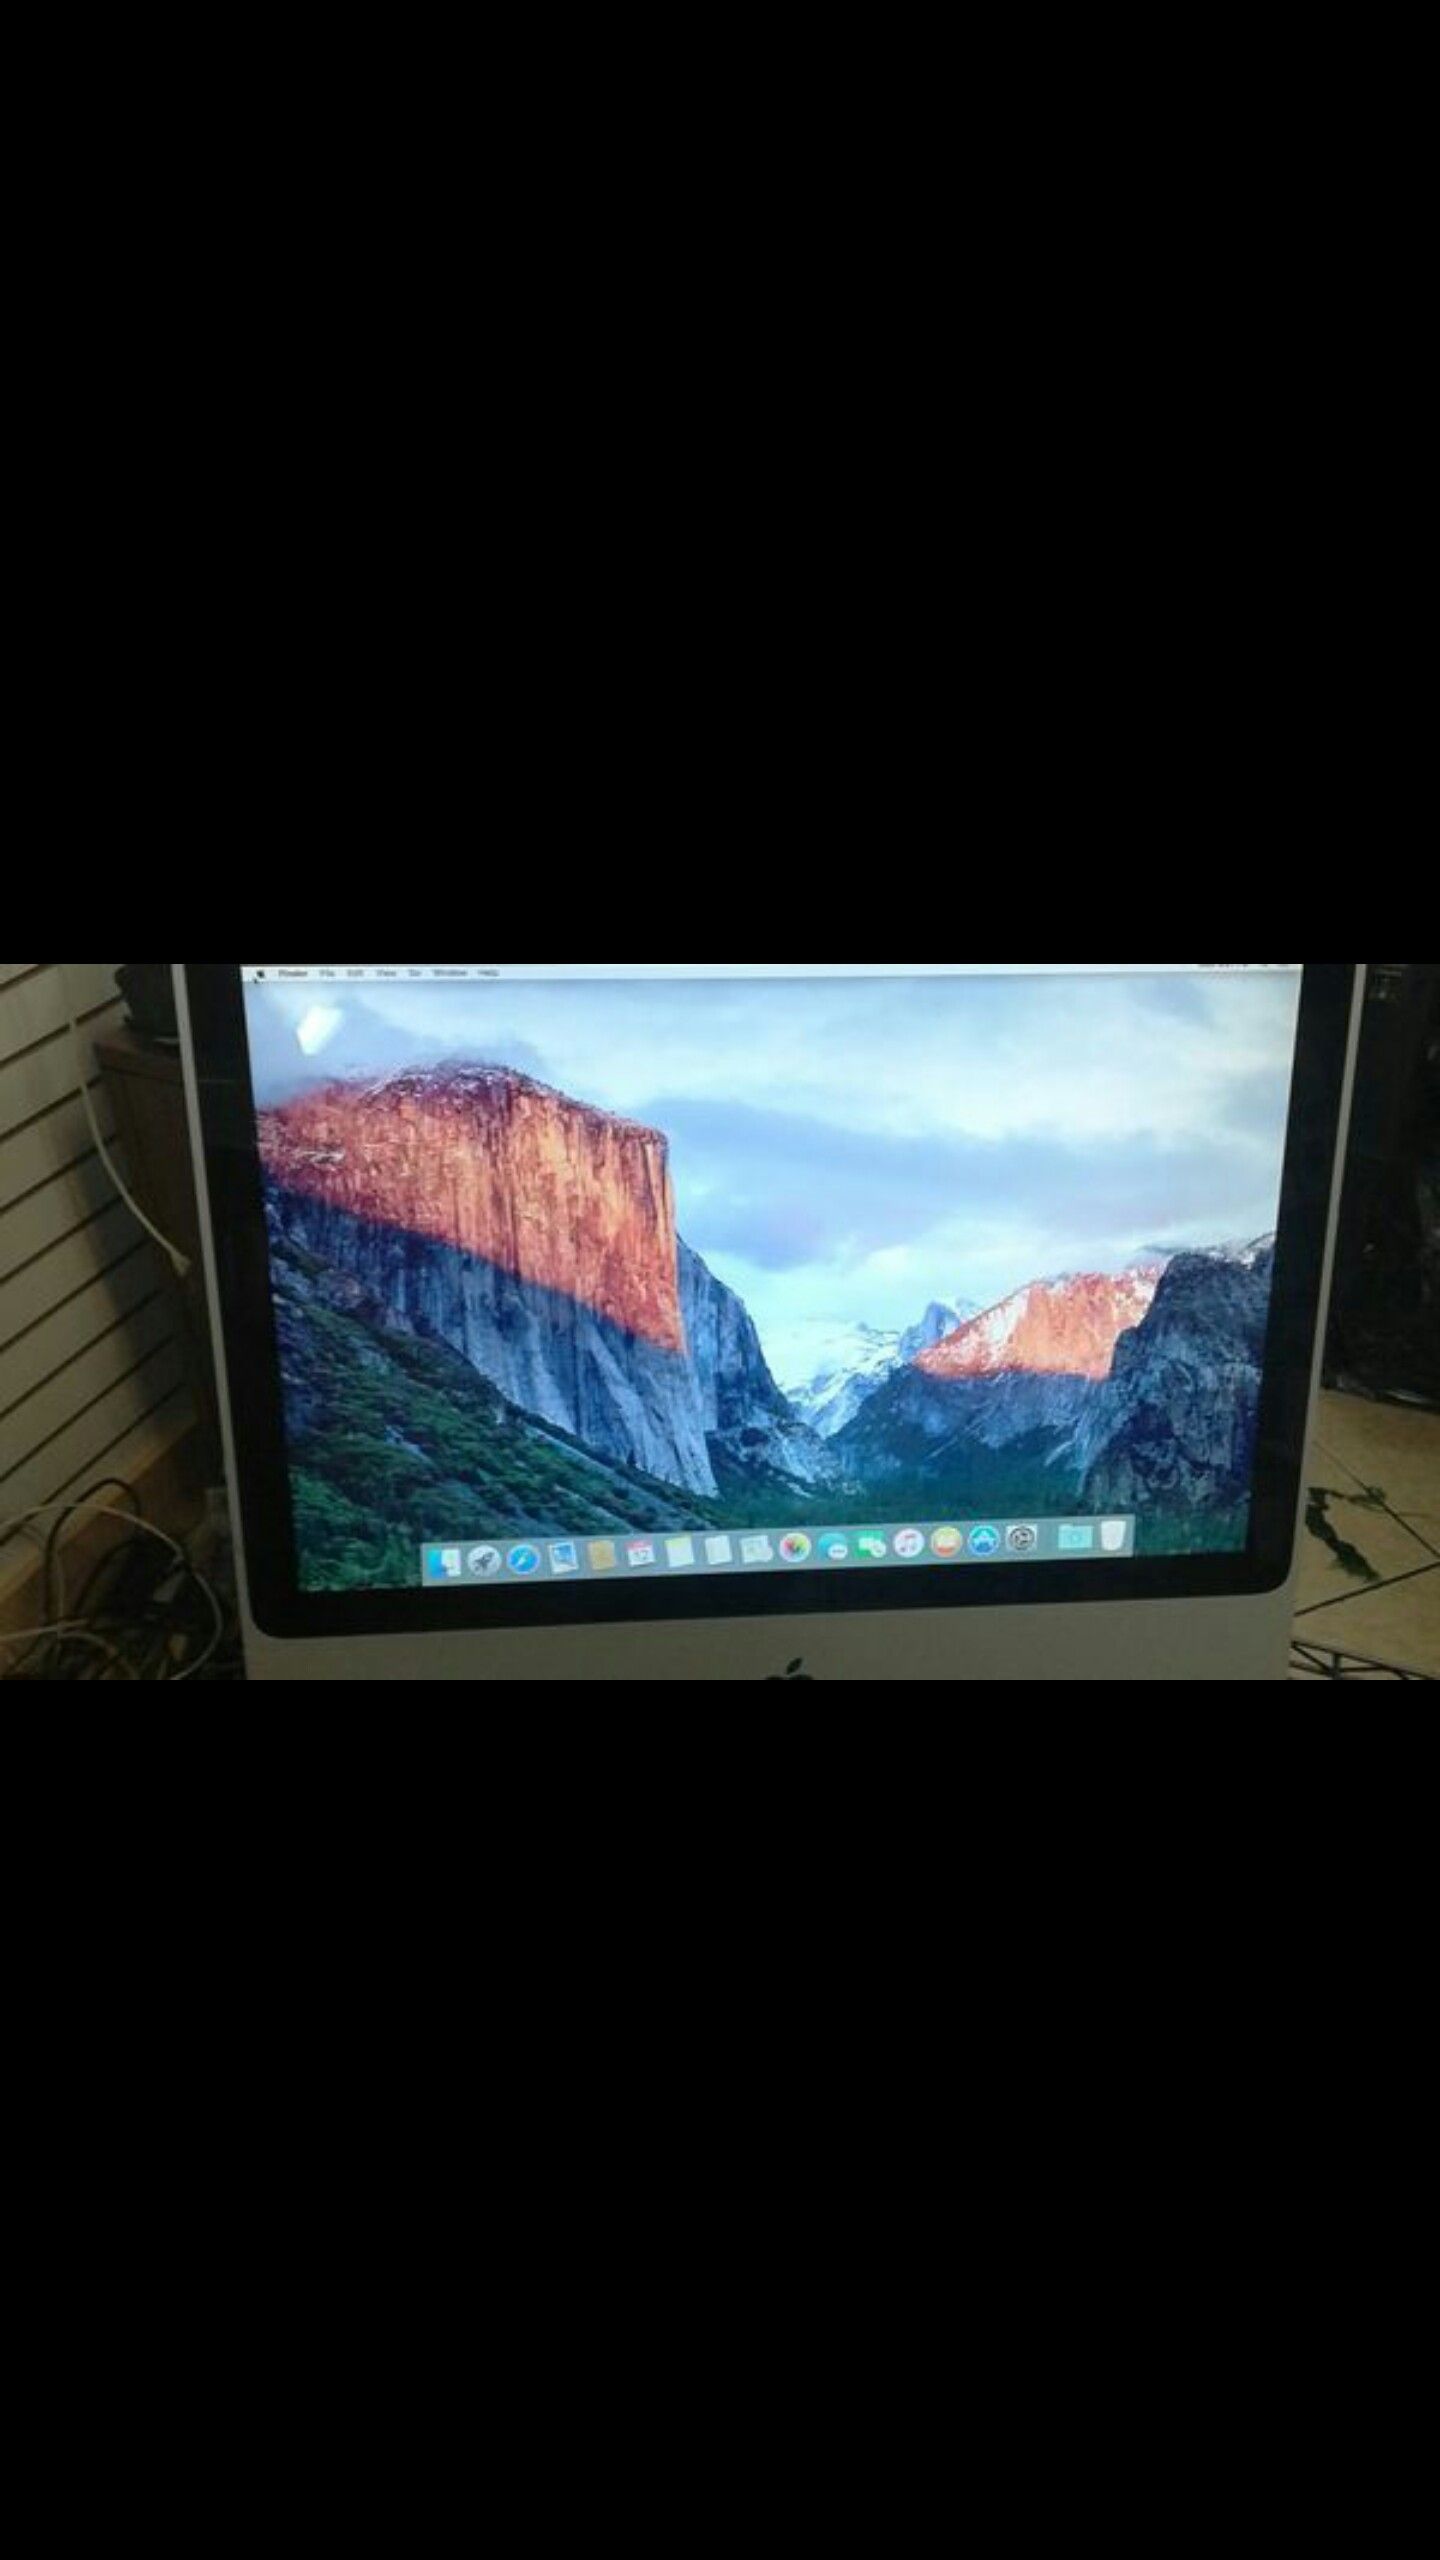 Apple iMac 20 inches Laptop Computer OSX 10.11.16 WIFI DVDRW 20 inches Screen Size 100% Tested Working Ready to Use